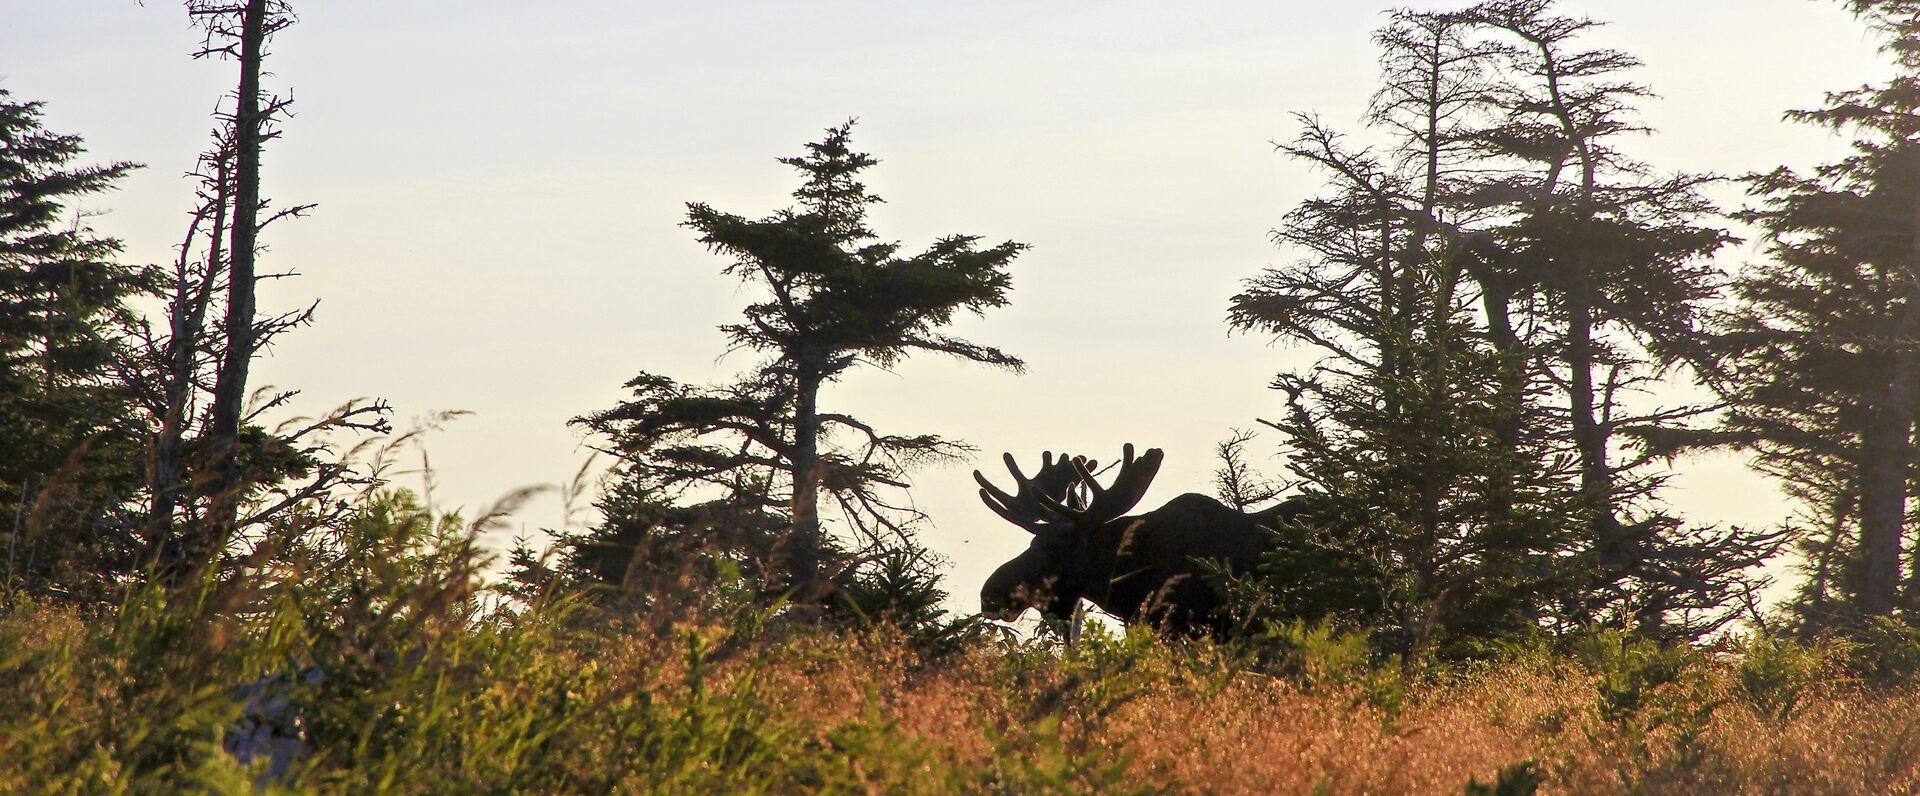 A bull moose stands in the forest in Cape Breton Highlands National Park.